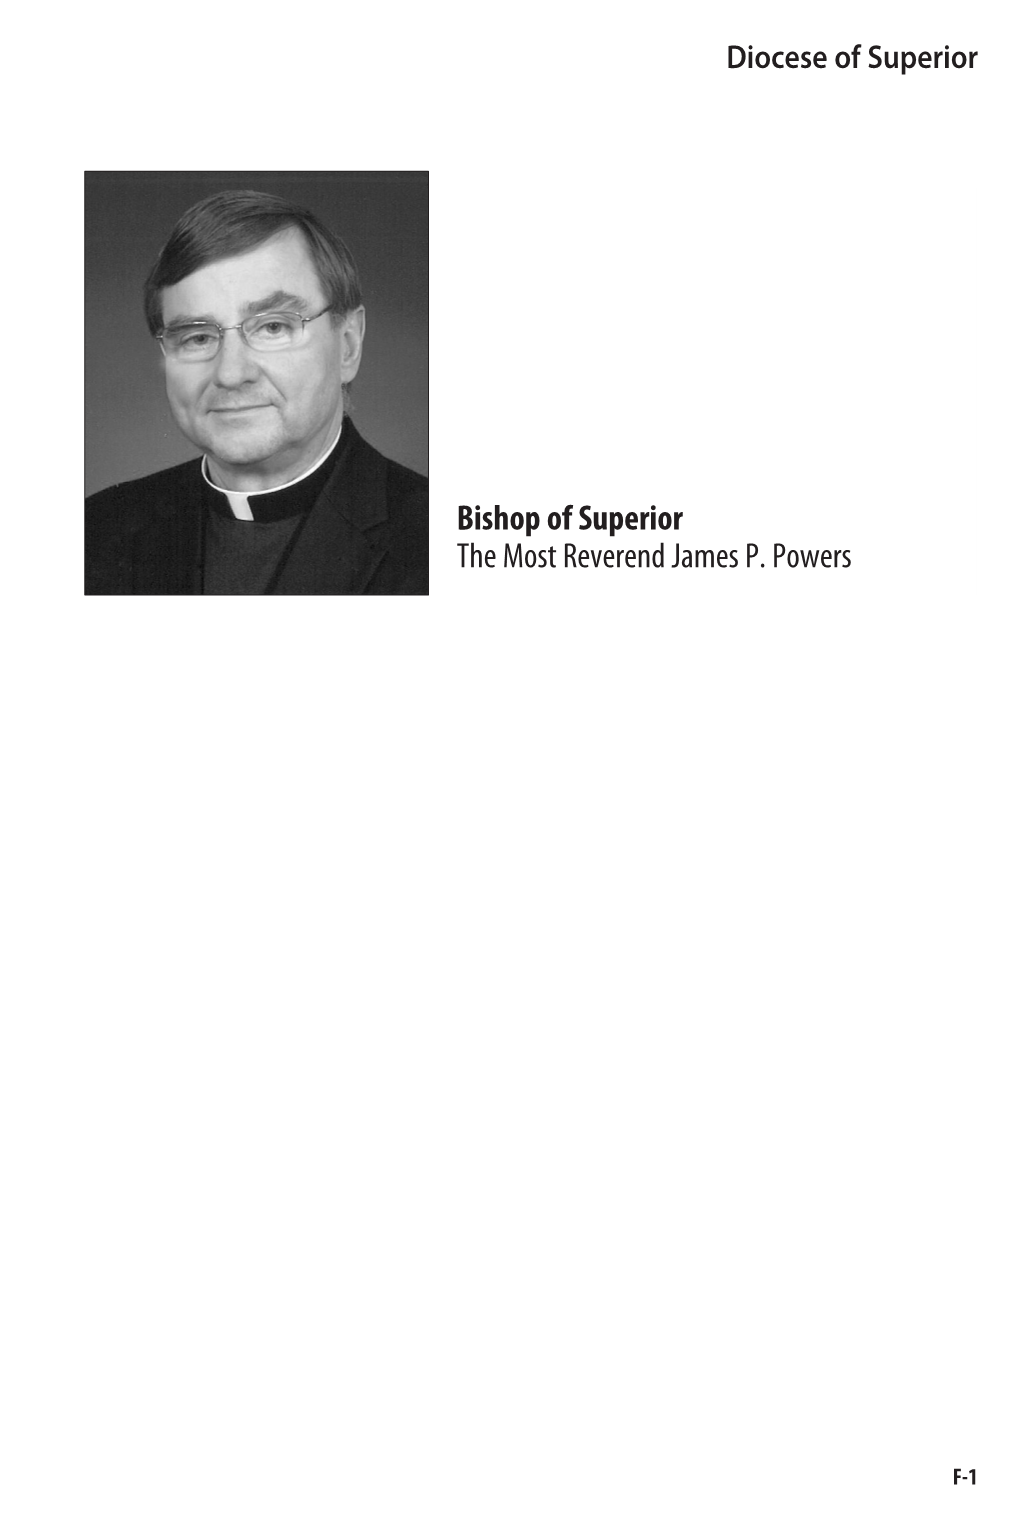 Bishop of Superior the Most Reverend James P. Powers